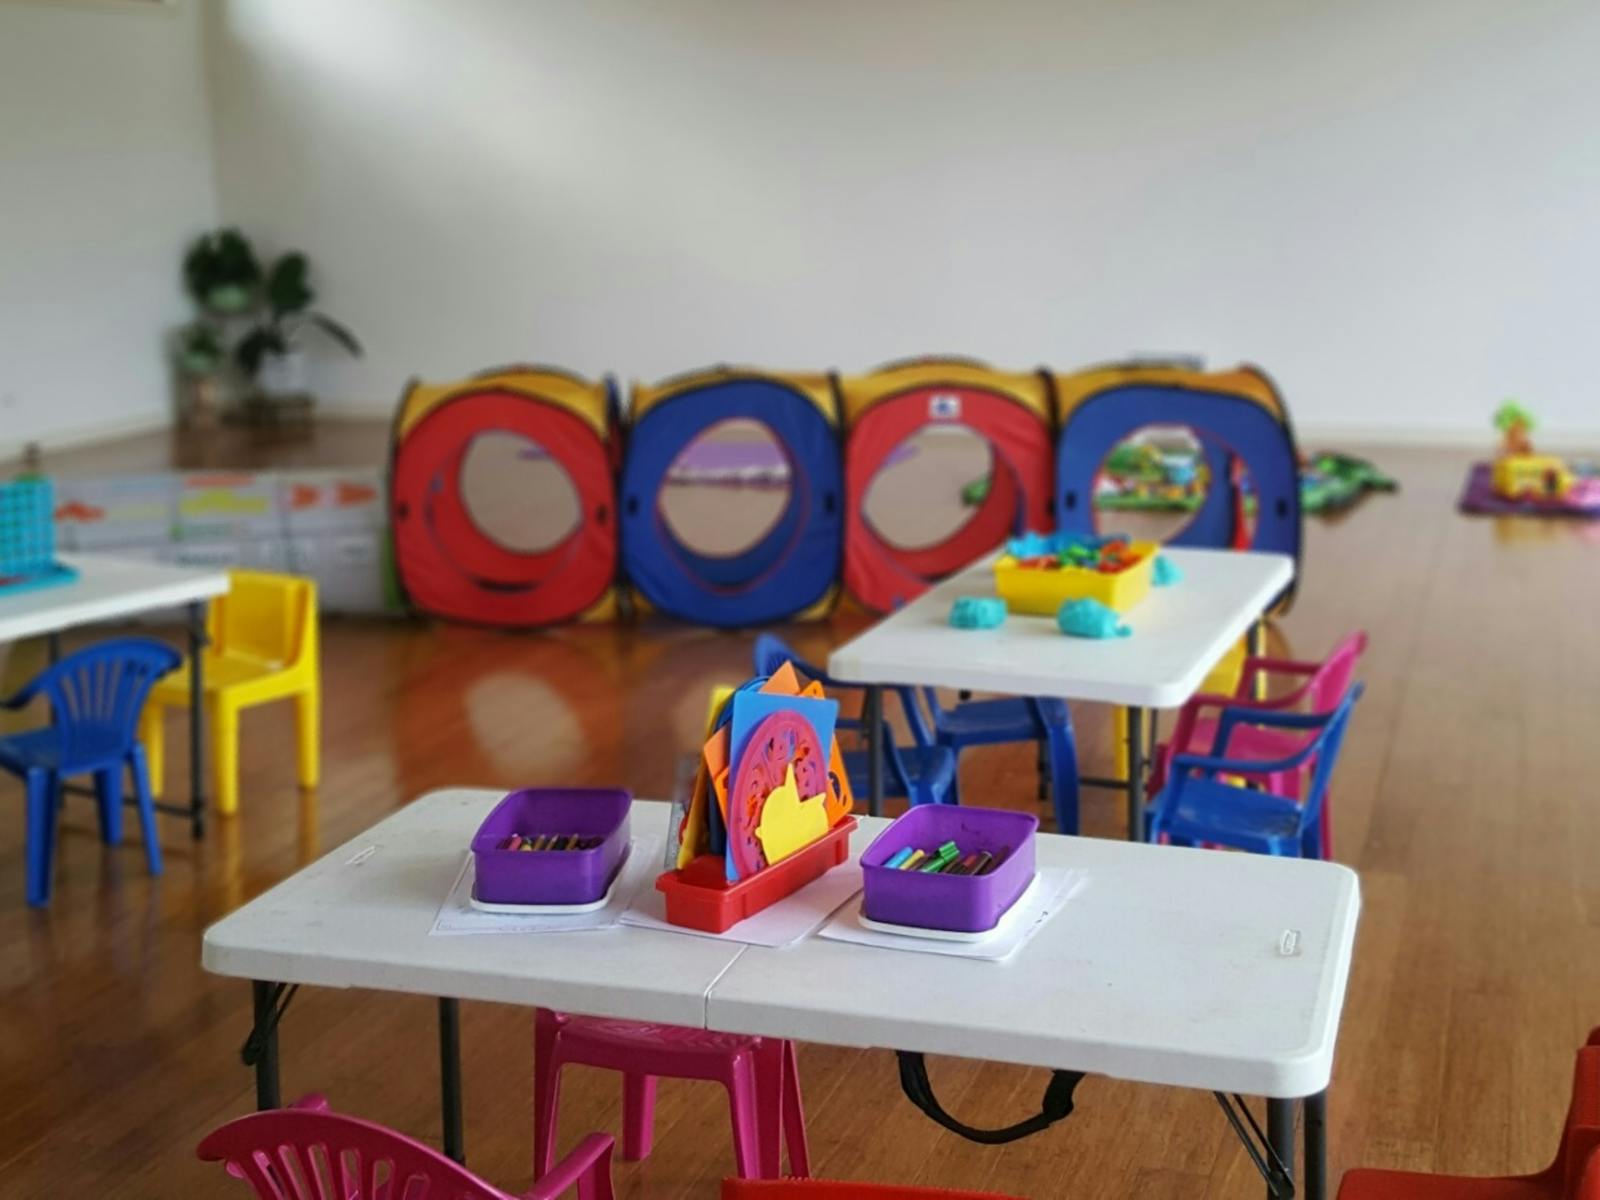 Depending on the location of service, an Activity Room is ideal for children attending.